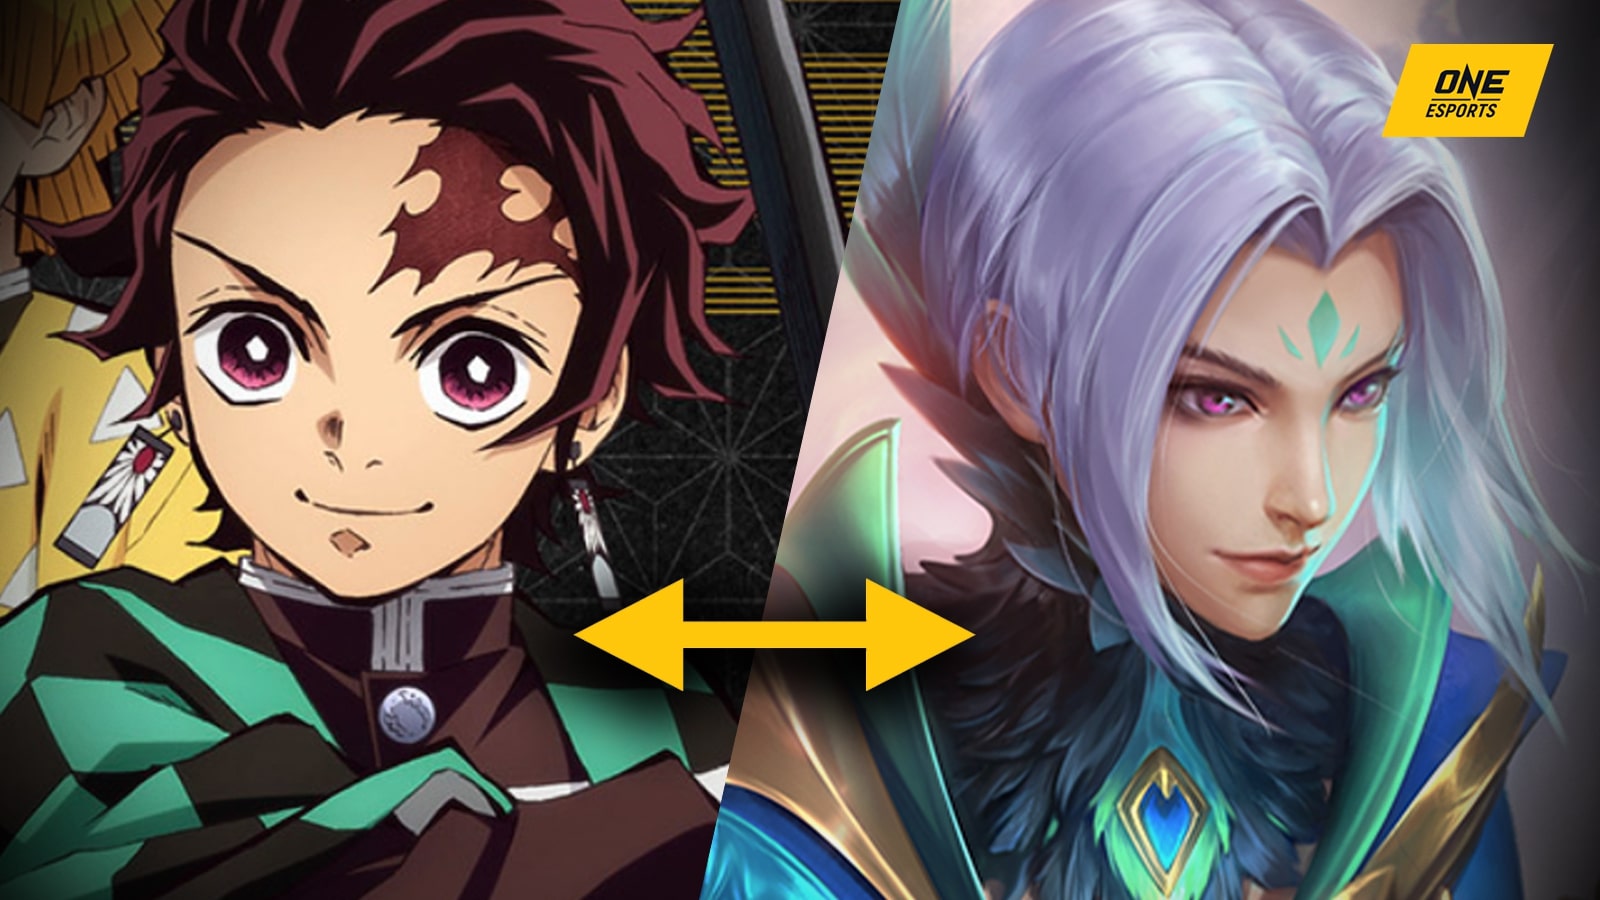 Demon Slayer x Mobile Legends: 3 very similar characters and heroes - ONE Esports